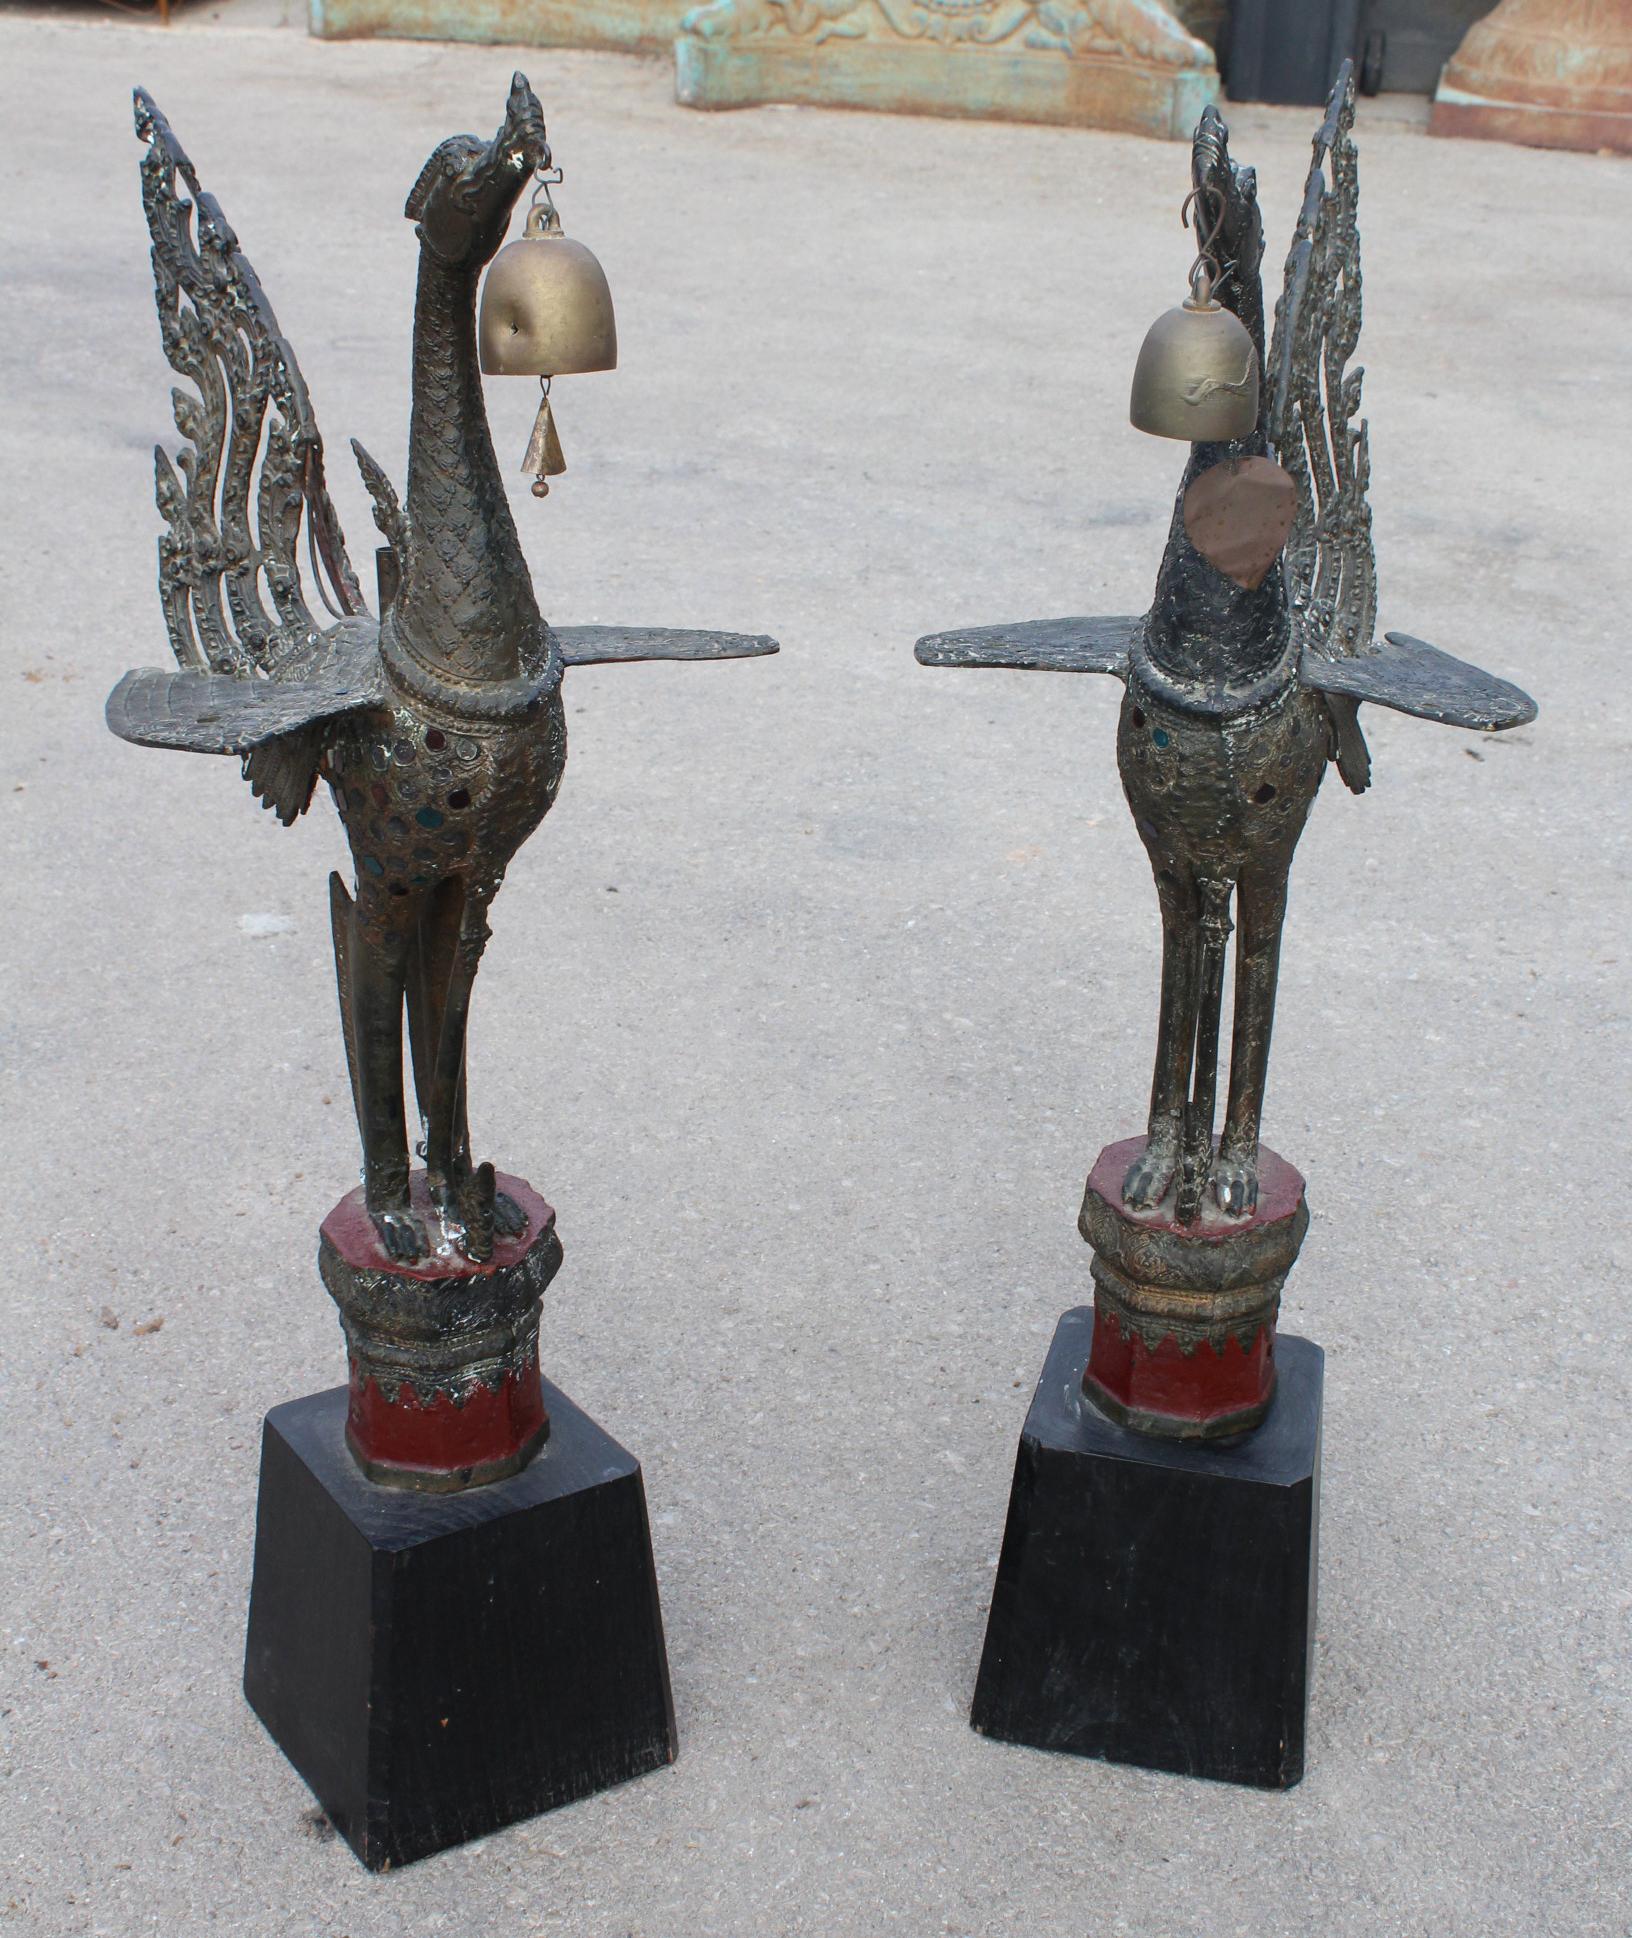 1980s pair of Asian bronze Garuda mythical Hindu birds with colored glass decorations on the wings and wooden bases.